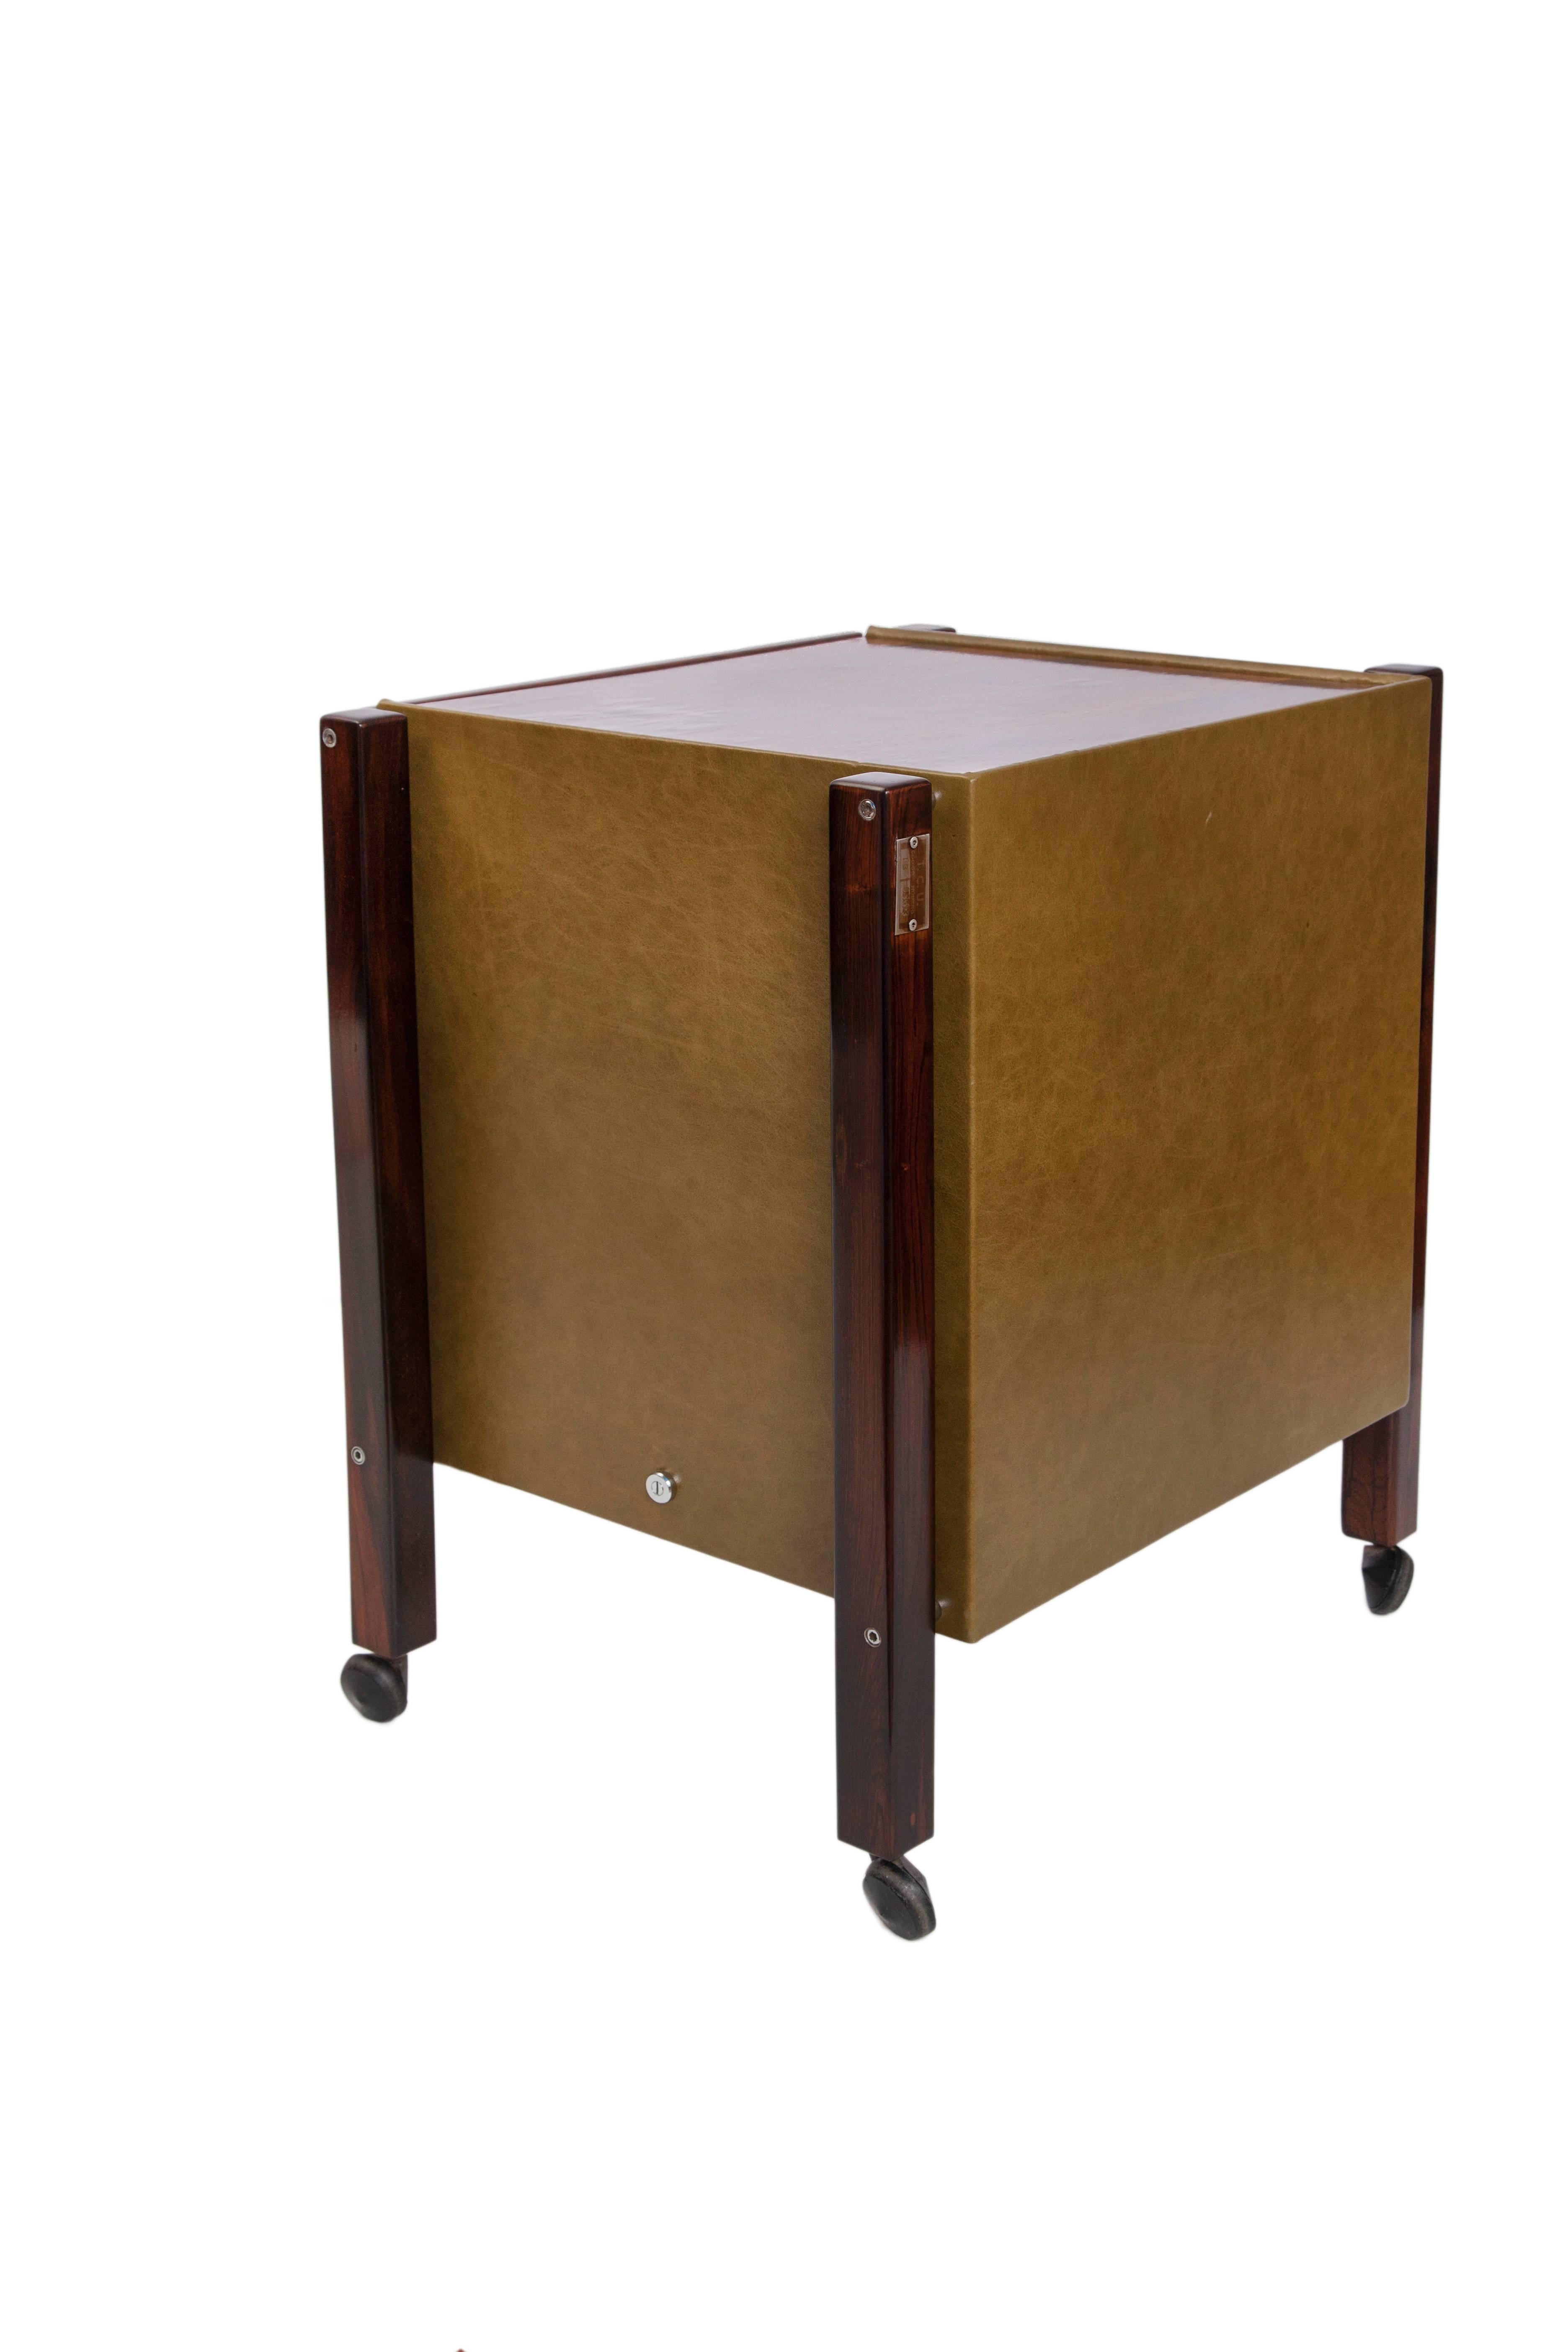 A pair of 1960s side tables on caster wheels by designer Jorge Zalszupin, each including patchwork top and legs in Brazilian jacaranda, single drawer with metal pull handle, green leather to the back and sides. Excellent vintage condition,